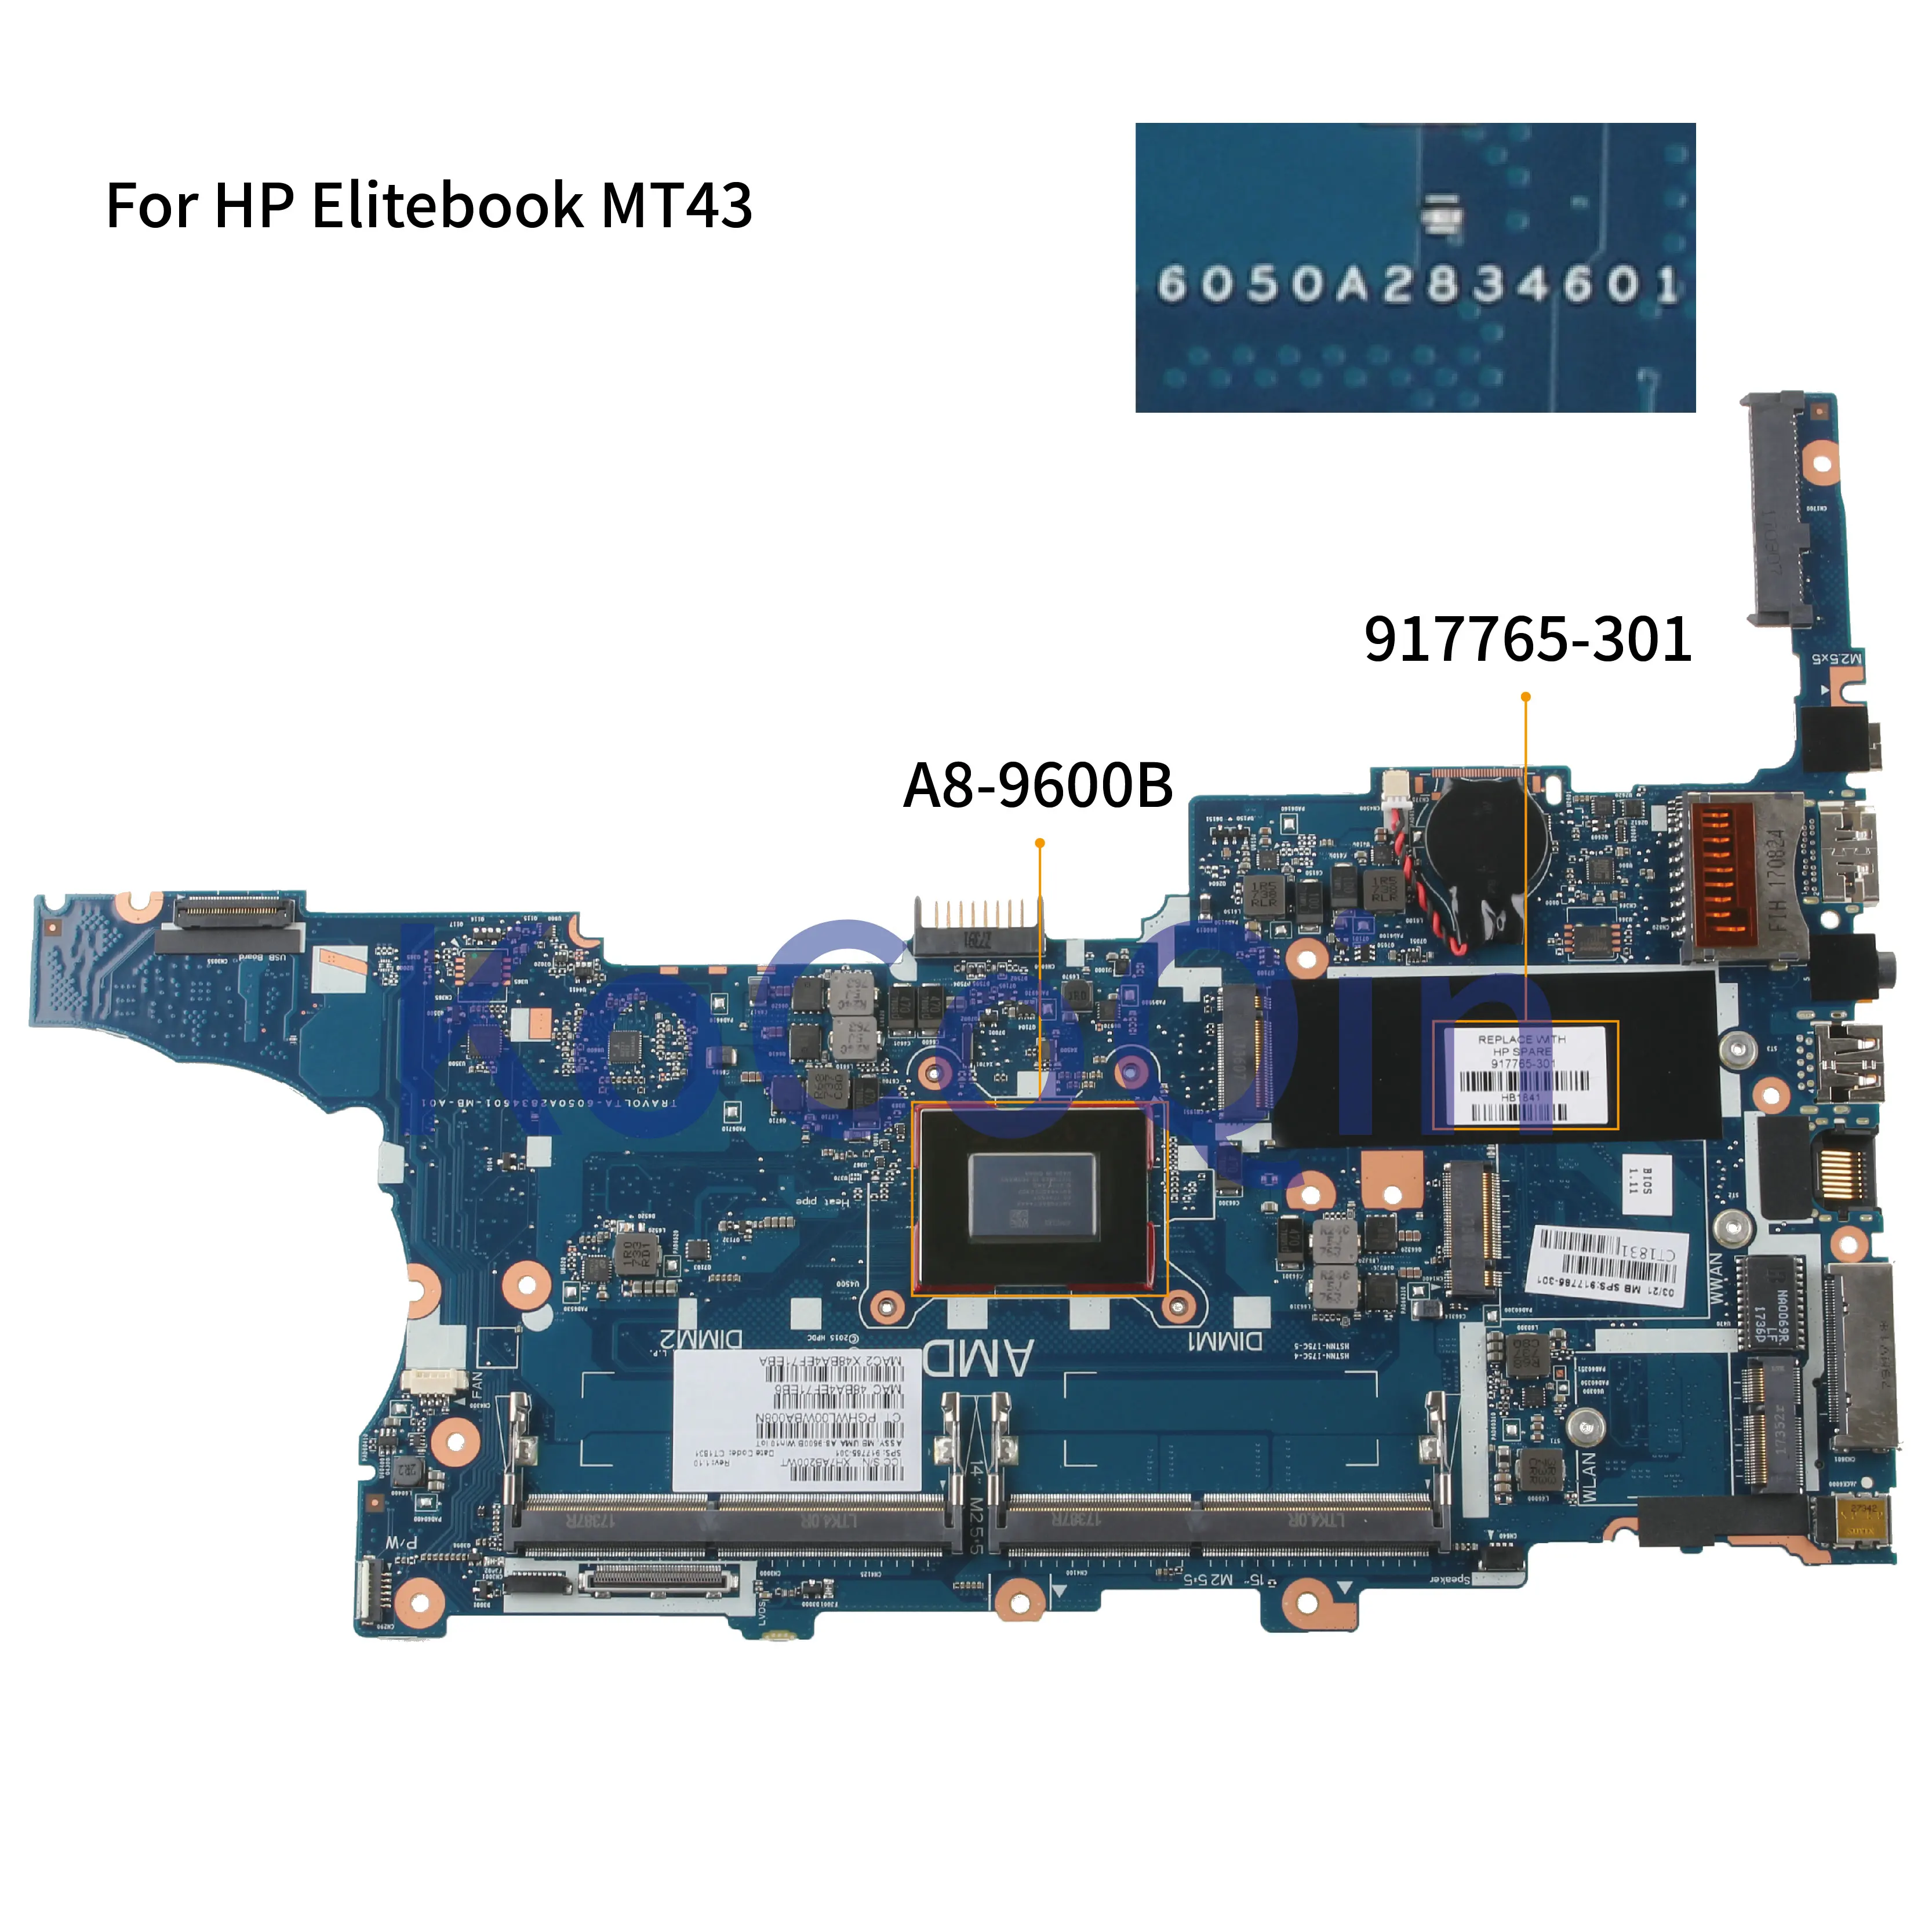 Discount  KoCoQin Laptop motherboard For HP Elitebook 745 G4 MT43 Mainboard 917765-001 917765-601 6050A283460